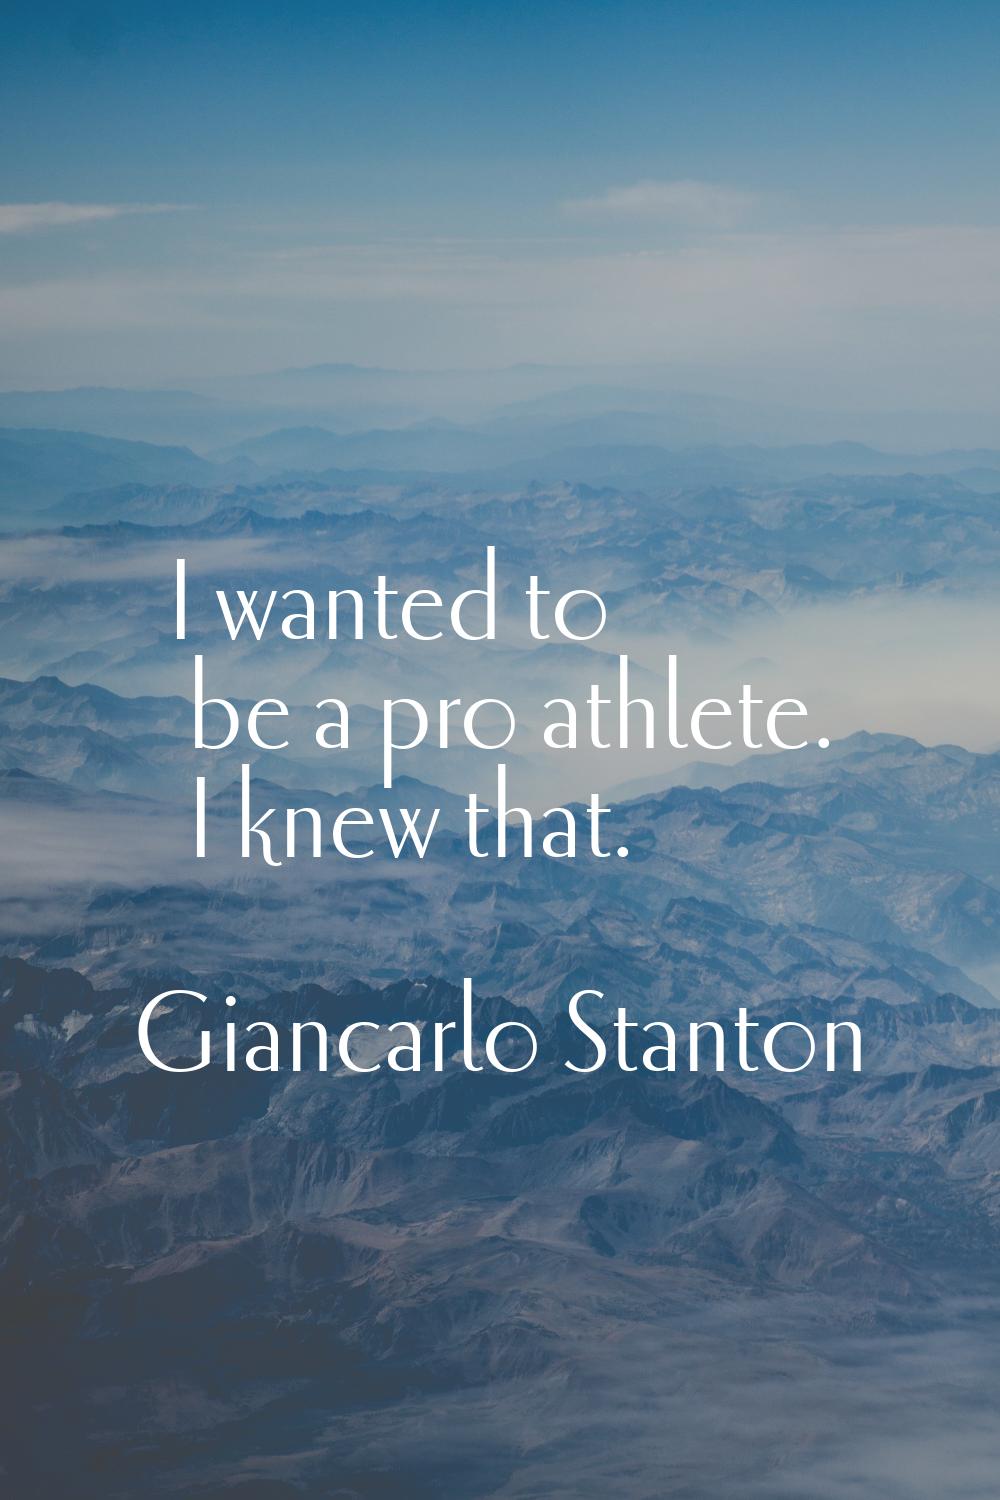 I wanted to be a pro athlete. I knew that.